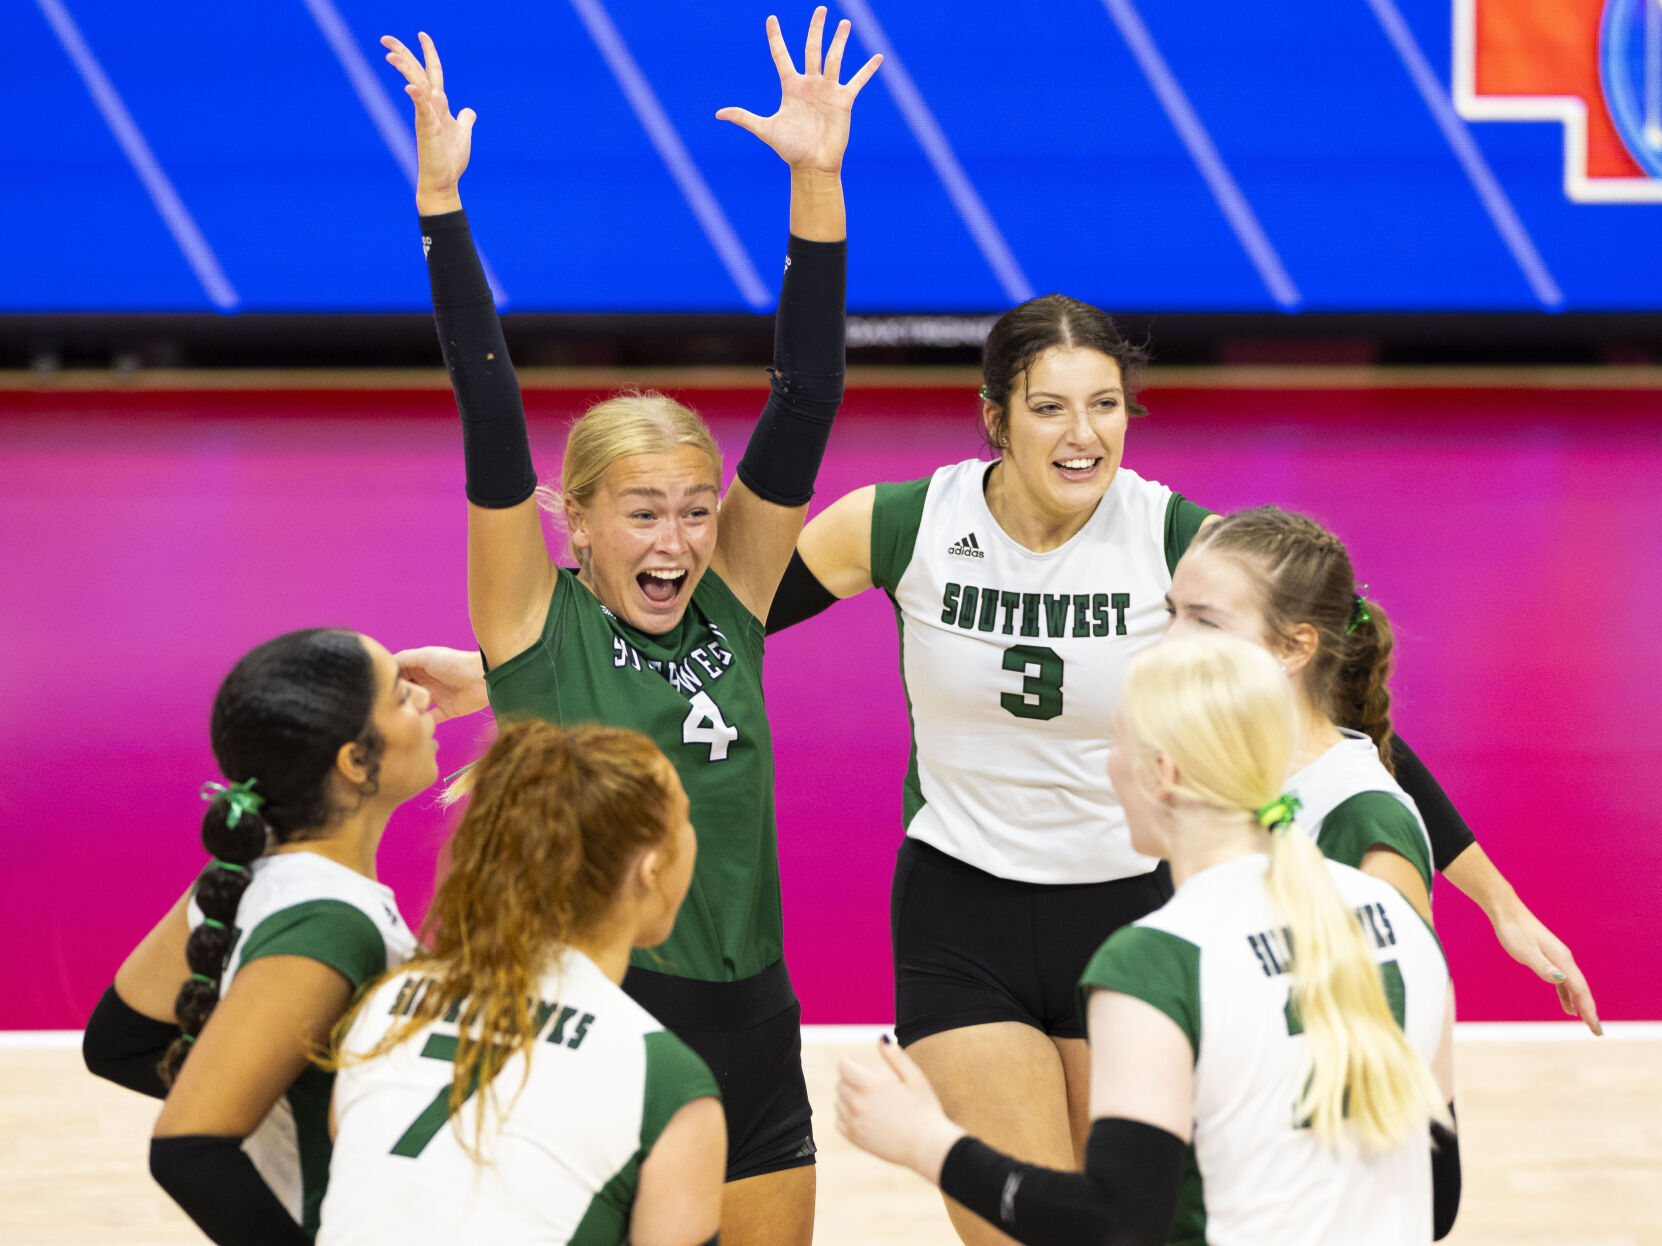 Lincoln Southwest Secures First-Ever State Volleyball Title with Dominant Performance